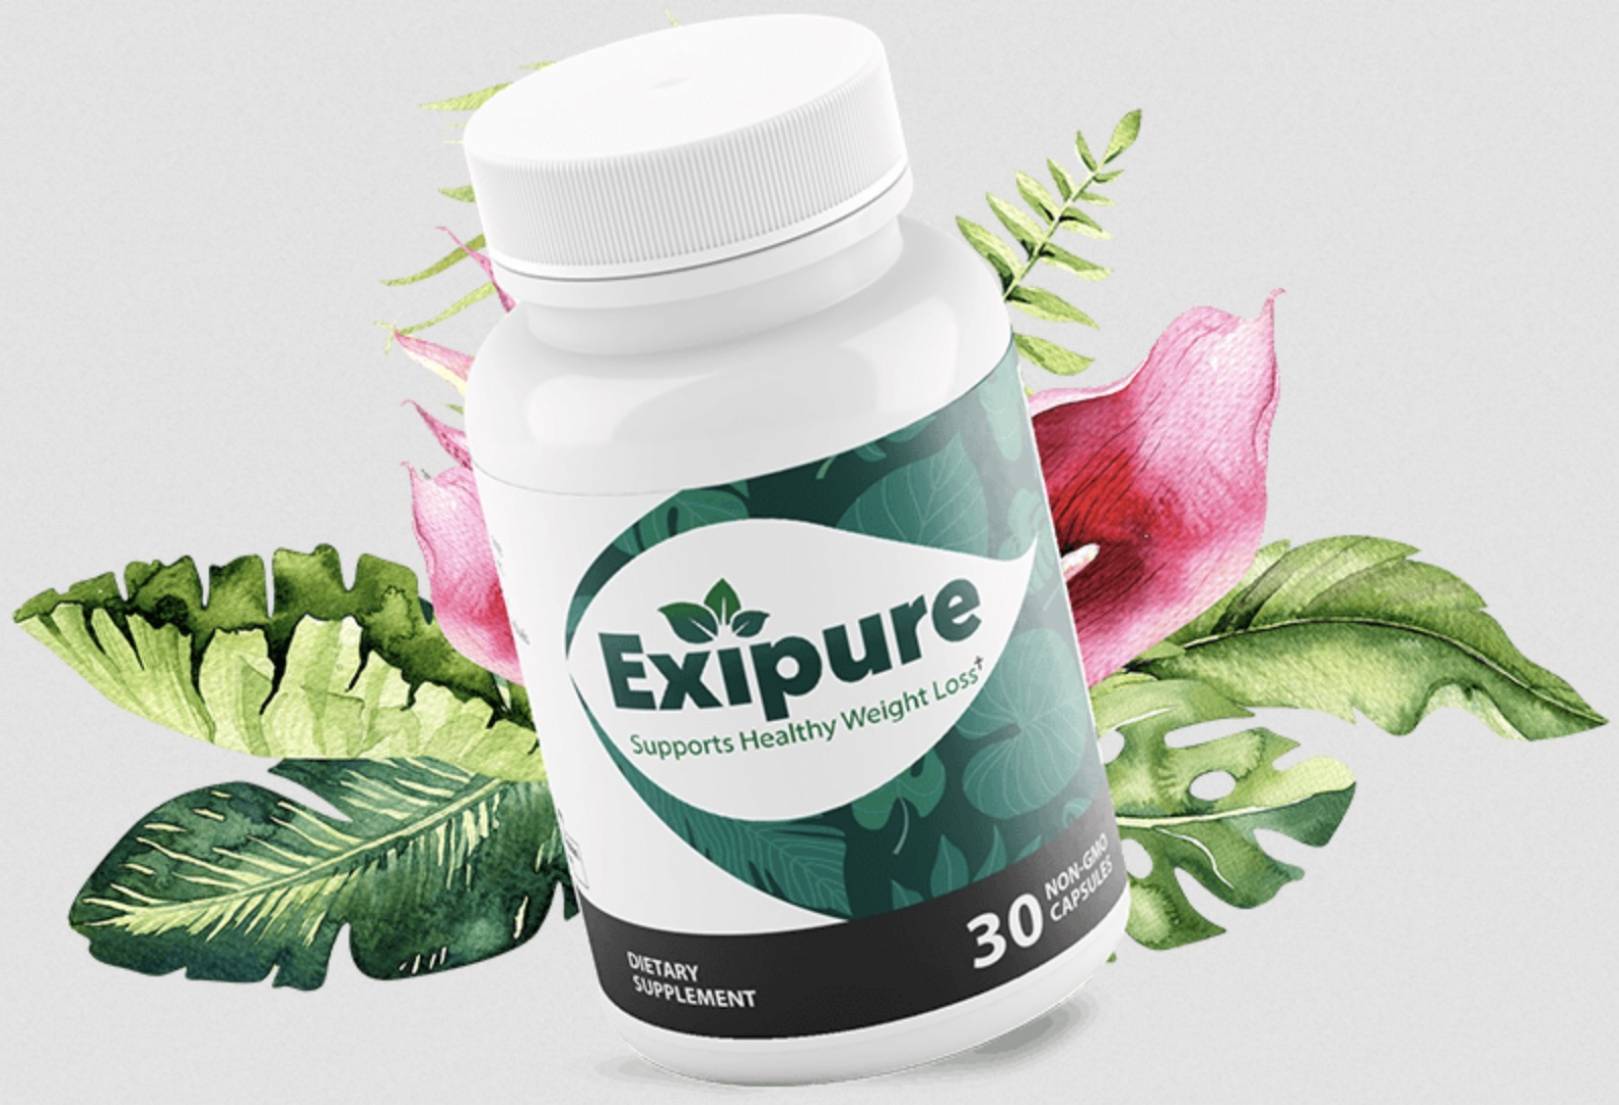 Who Sells Exipure